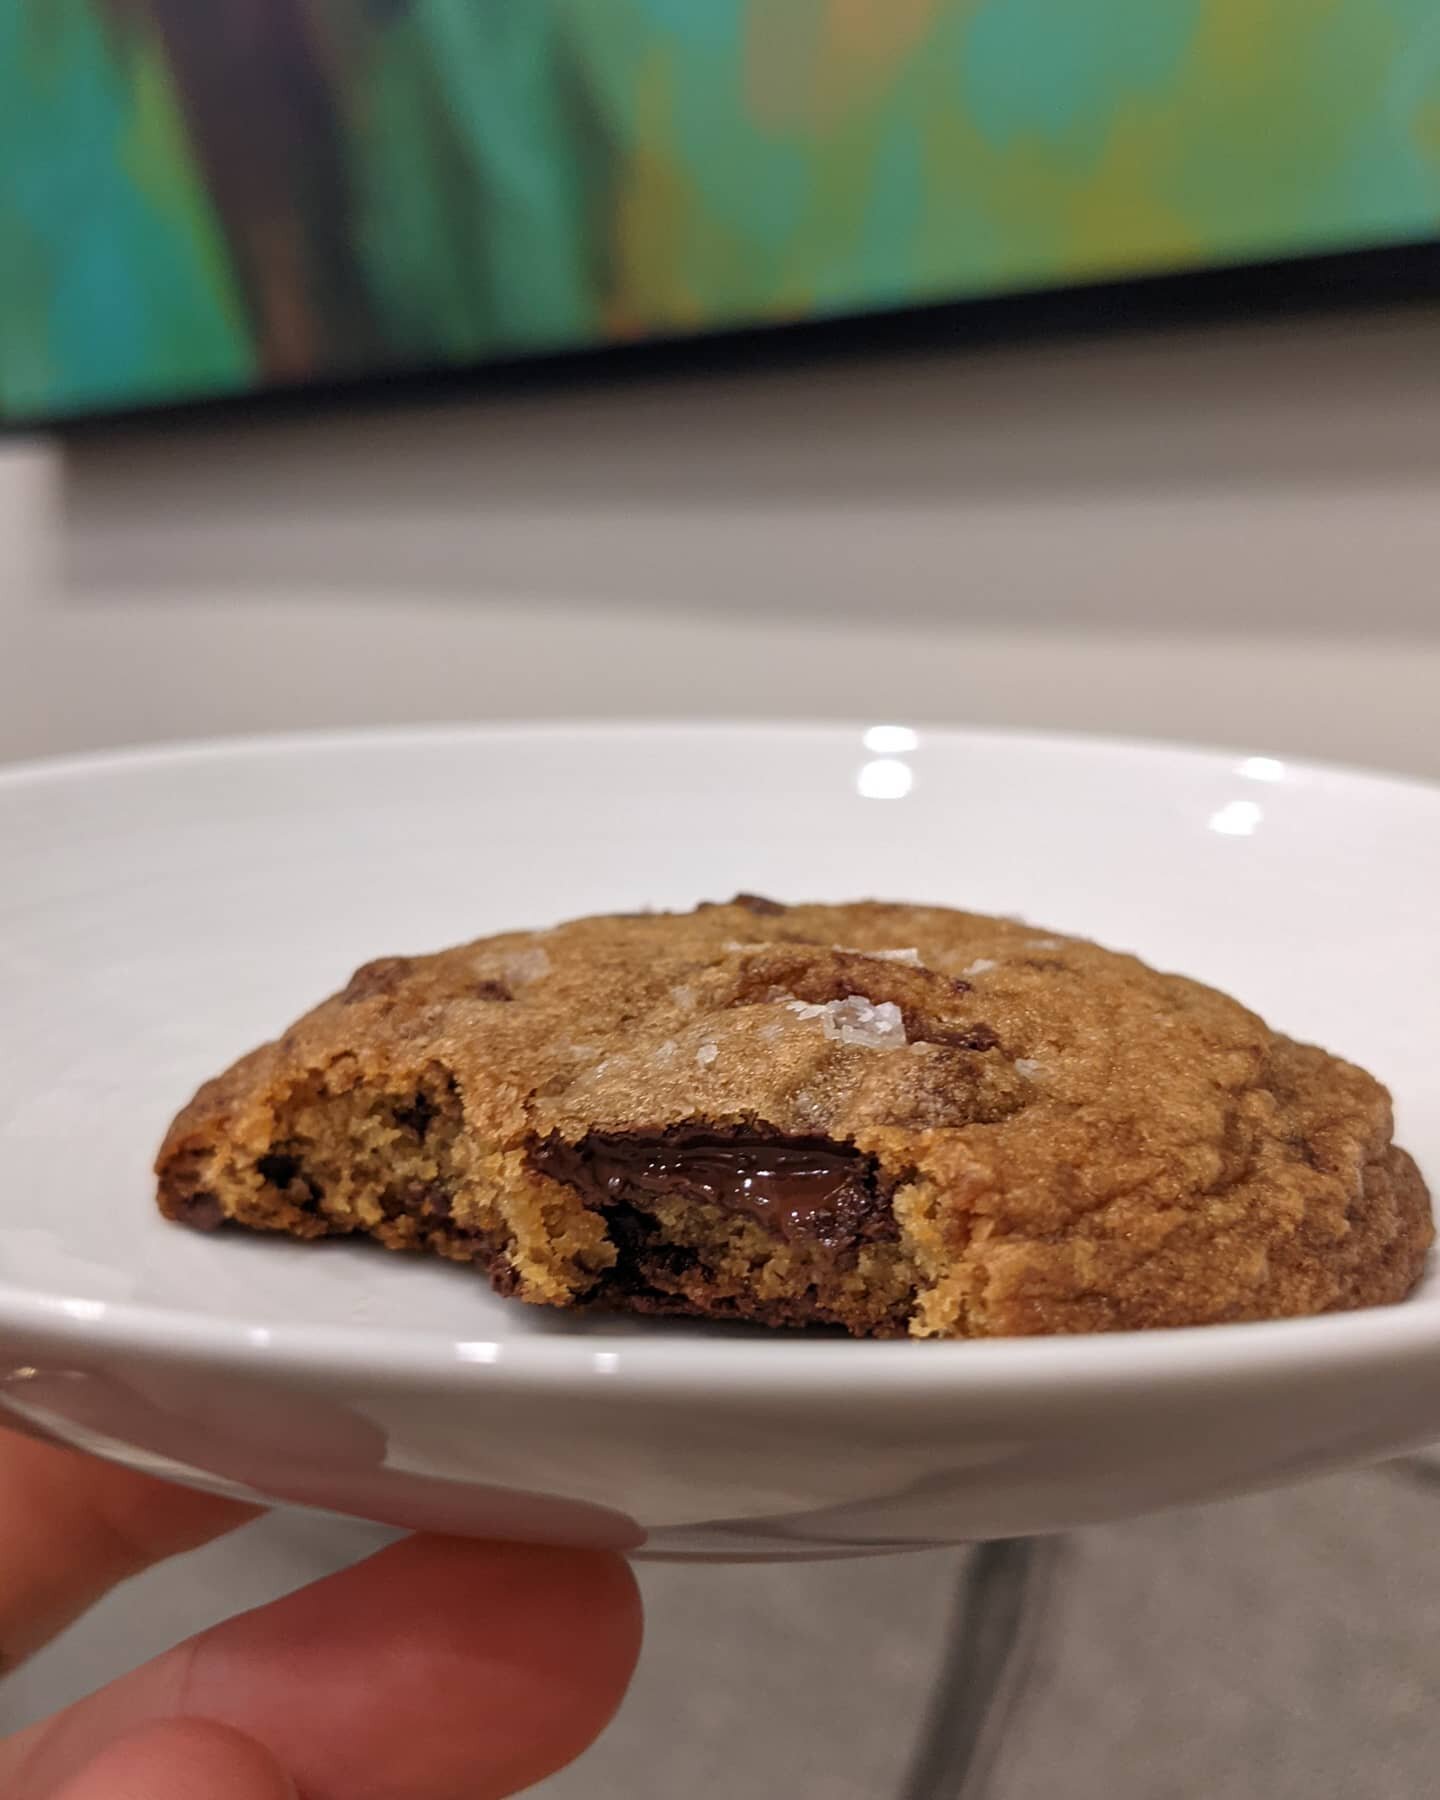 *ultimate* chocolate chip cookie - nutty, gooey, cakey and crispy all in one.
browned butter and dark brown sugar for nuttiness
creamed butter and sugar for lift
chilled and rested for full hydration
frozen for warm cookies on demand!